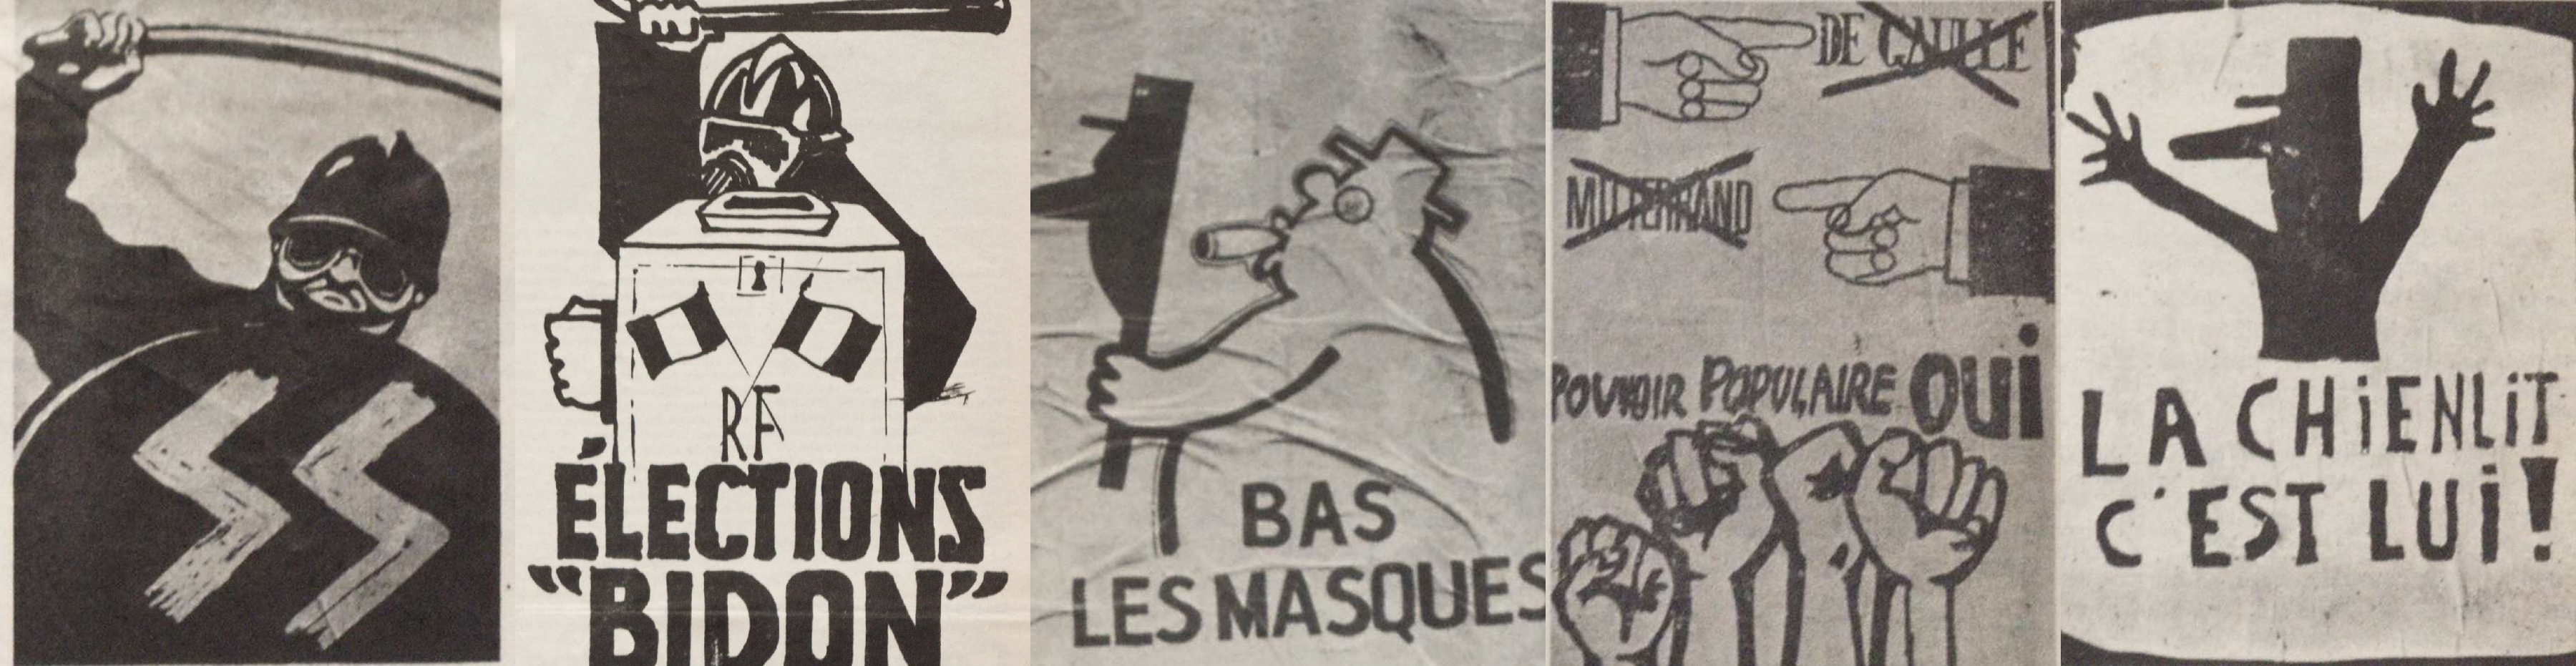 Examples of posters produced around May 1968